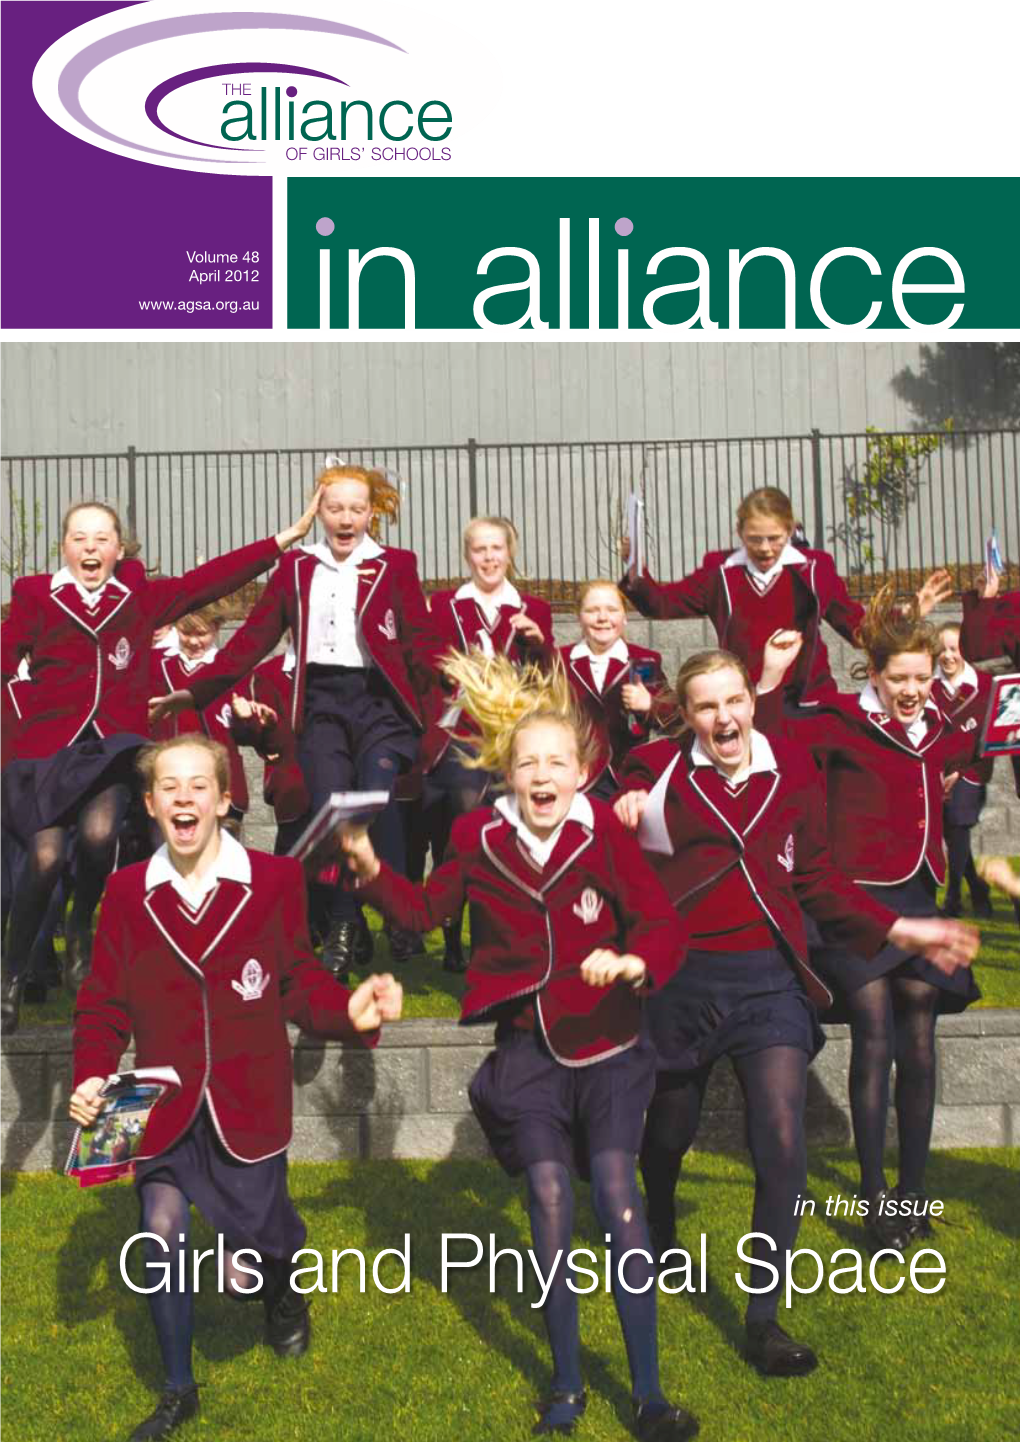 Girls and Physical Space the Alliance of Girls’ Schools (Australasia) Ltd GPO Box 55 from the President